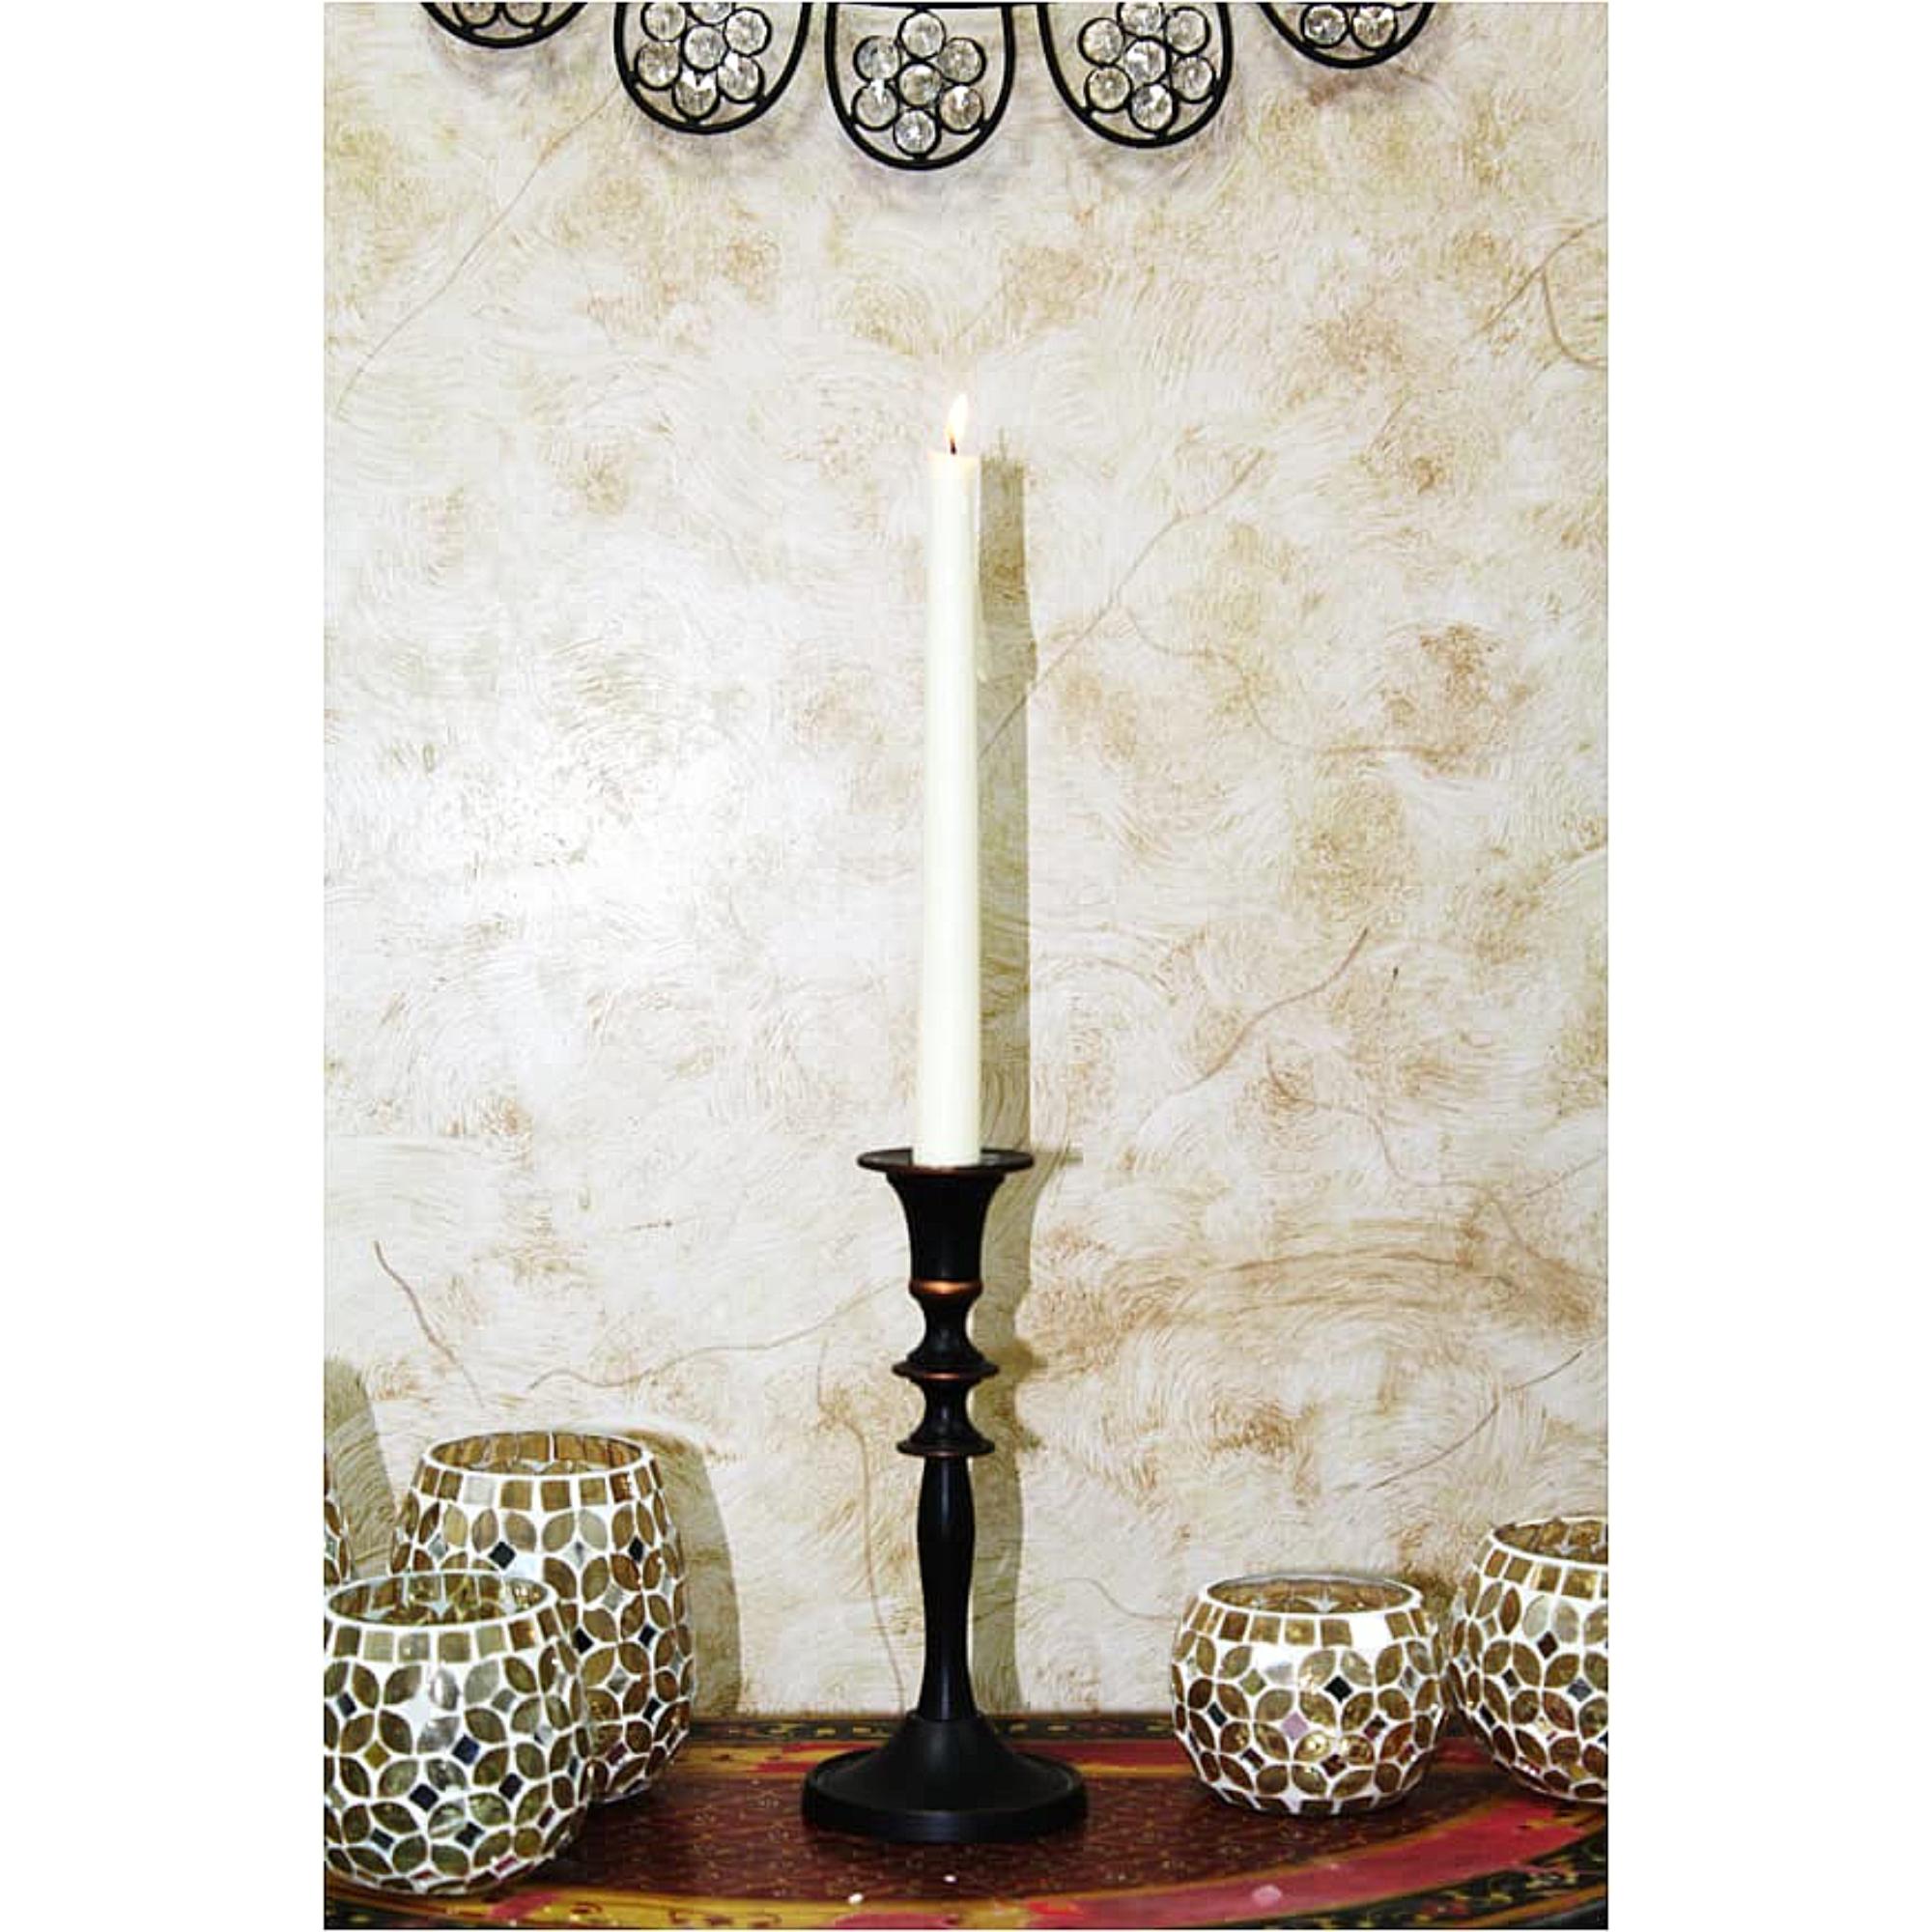 Antique Bronze Taper Candle Holders - 8 High. Classic Elegance. Great for  Party Favor, Gifts, Weddings W1